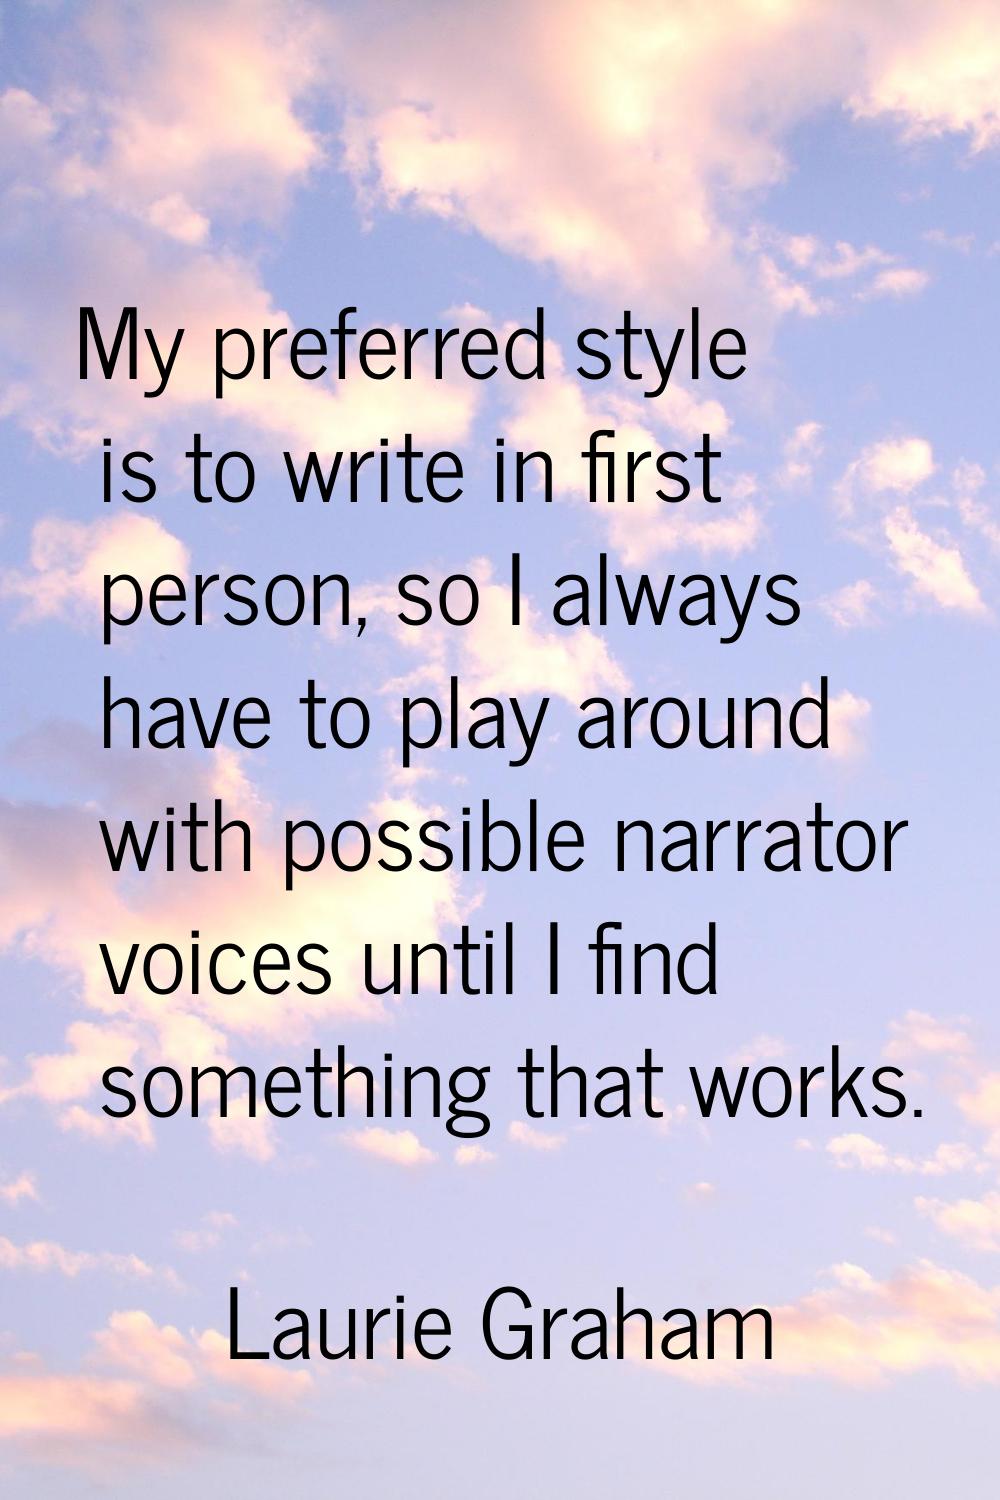 My preferred style is to write in first person, so I always have to play around with possible narra